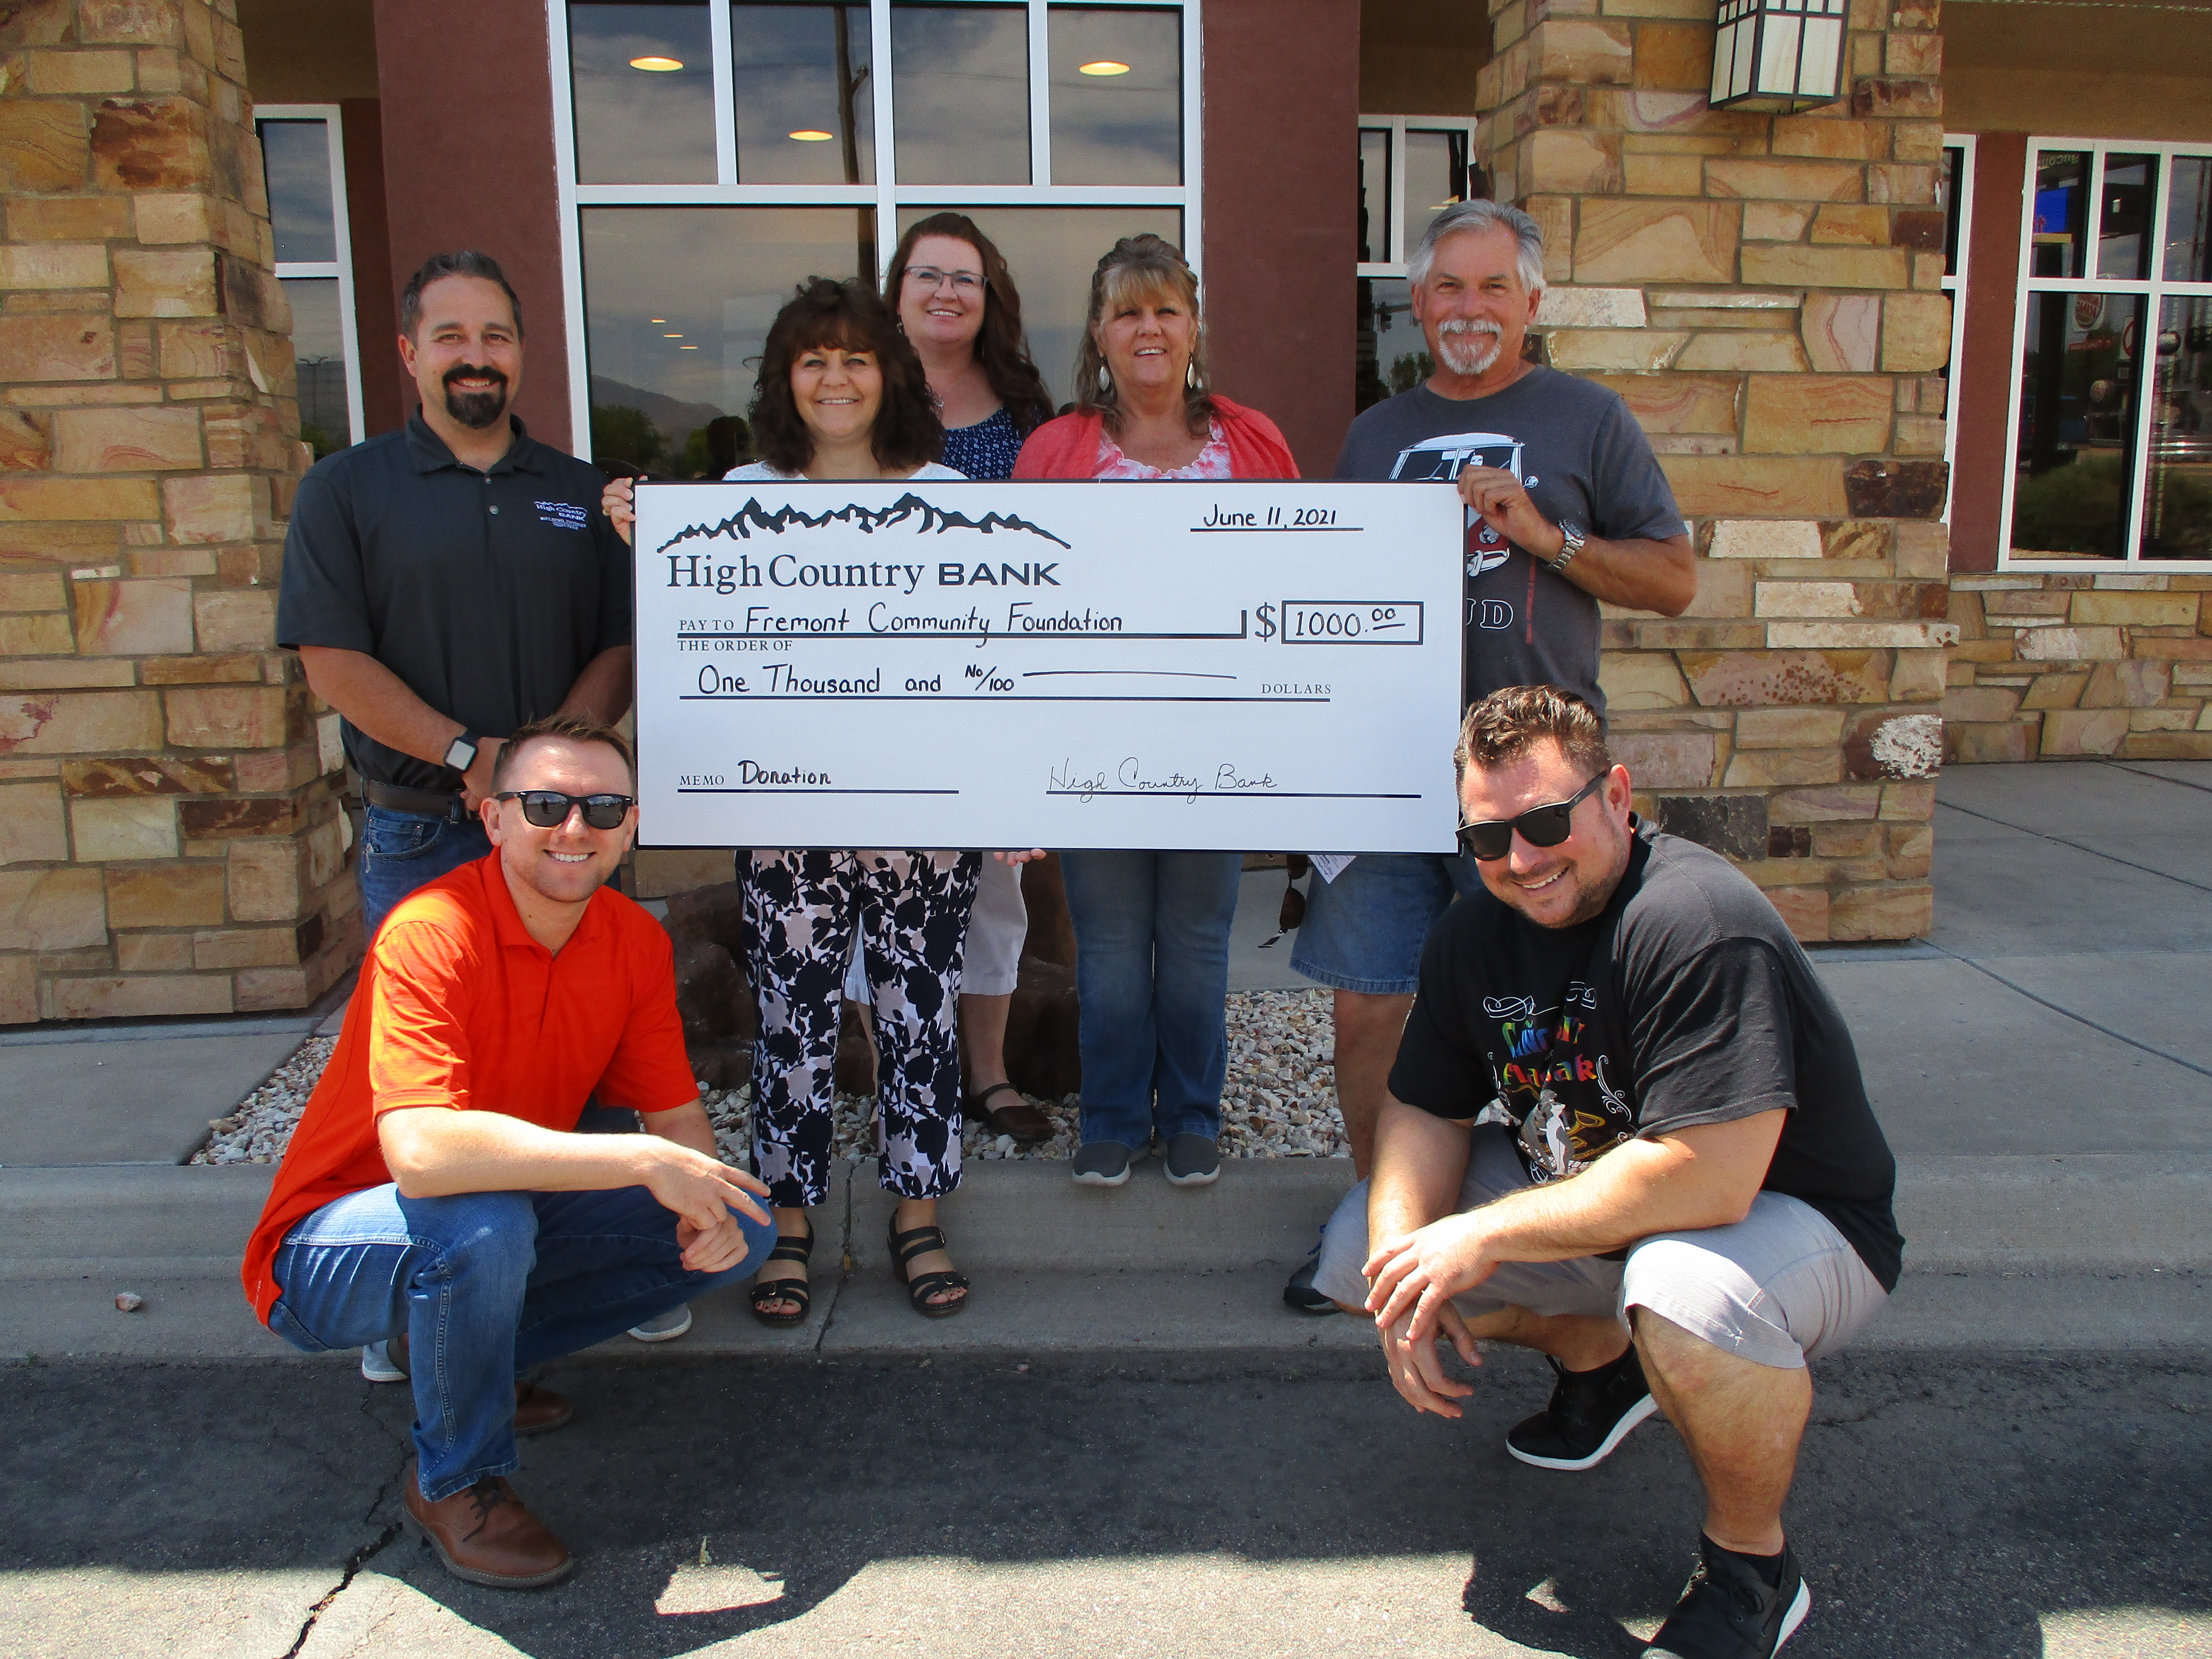 Canon City Branch gives check donation to Fremont CO Fair